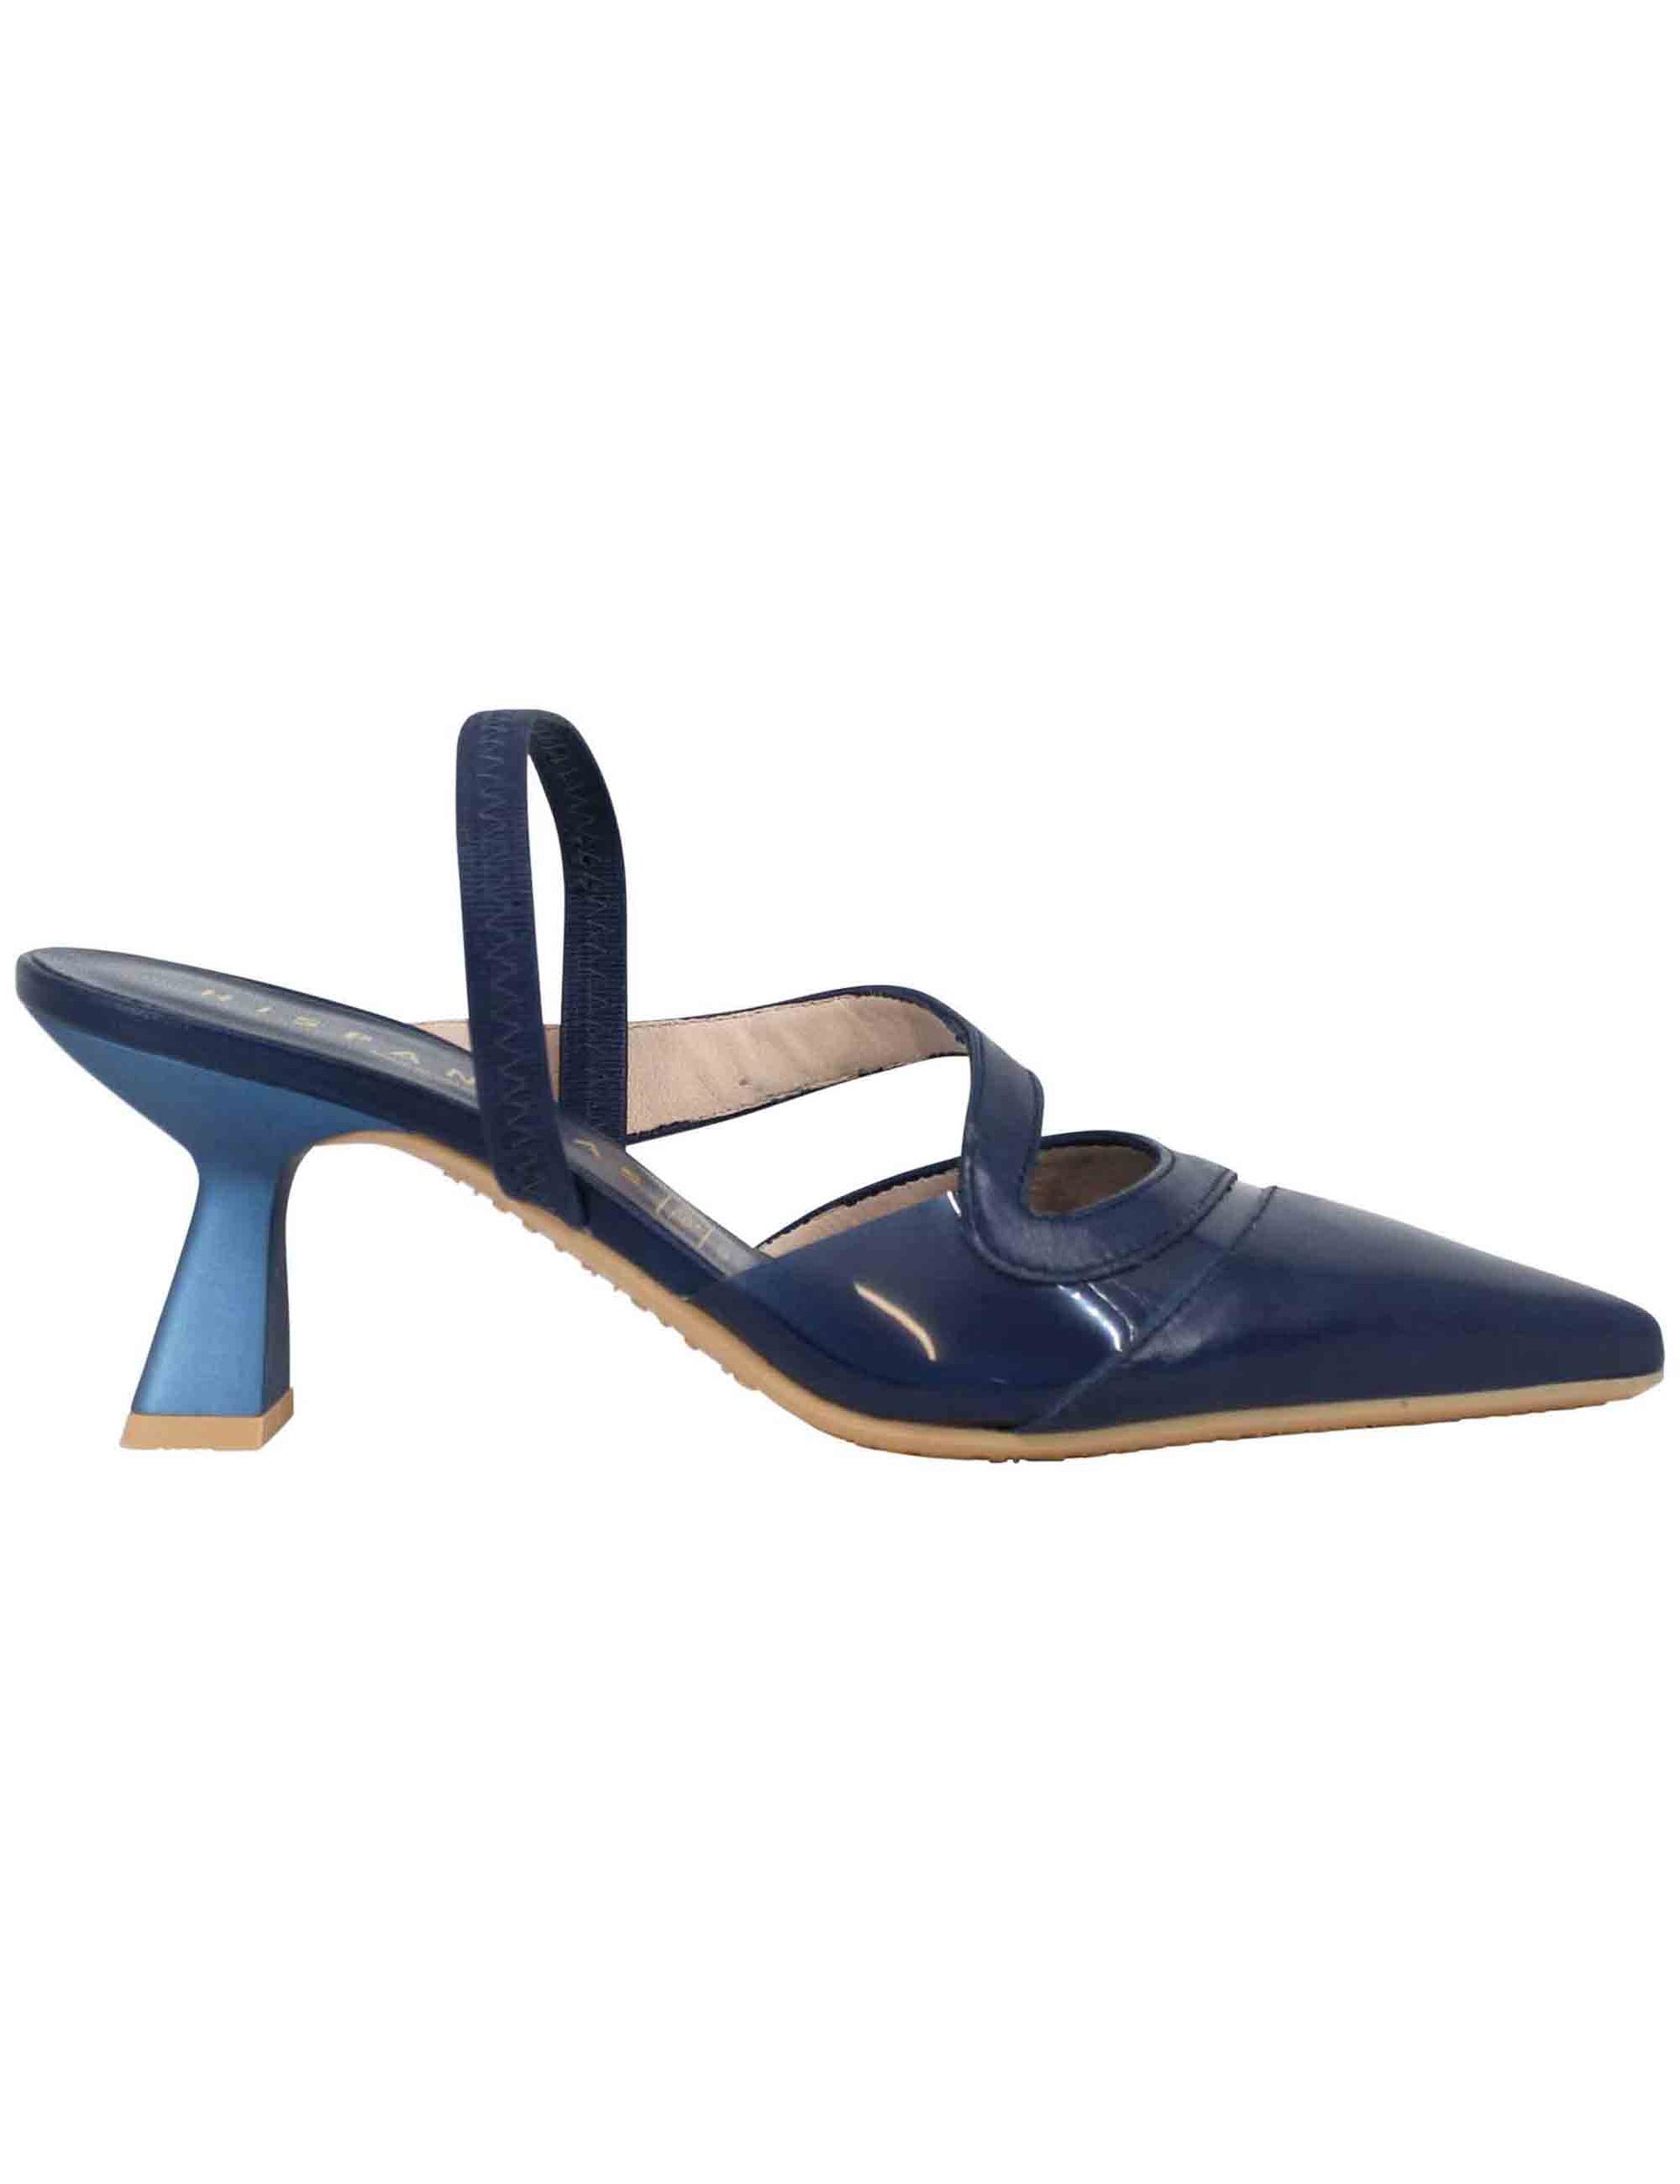 Women's slingback pumps in blue leather with elastic back